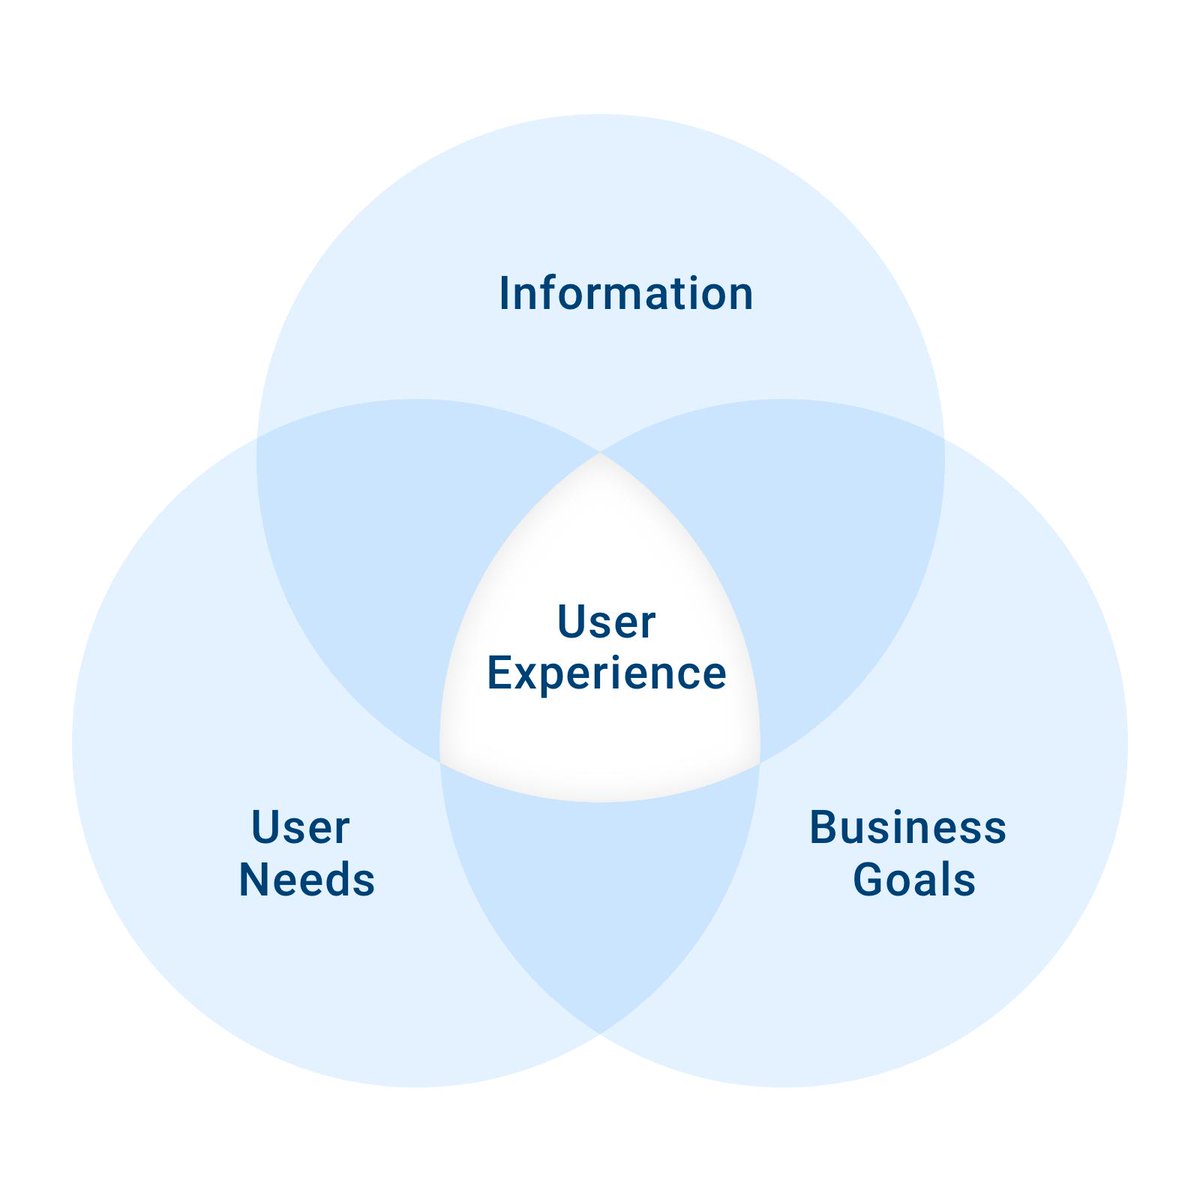 User-Centered Design: Process And Benefits > ow.ly/Ge1Y50v2epQ

#ux #uxdesign #ucd #uxresearch #userresearch #productdesign #designthinking #prototyping #startup #businessgoals #uxprocess #userneeds #users #customers #mvp #startup #design #research